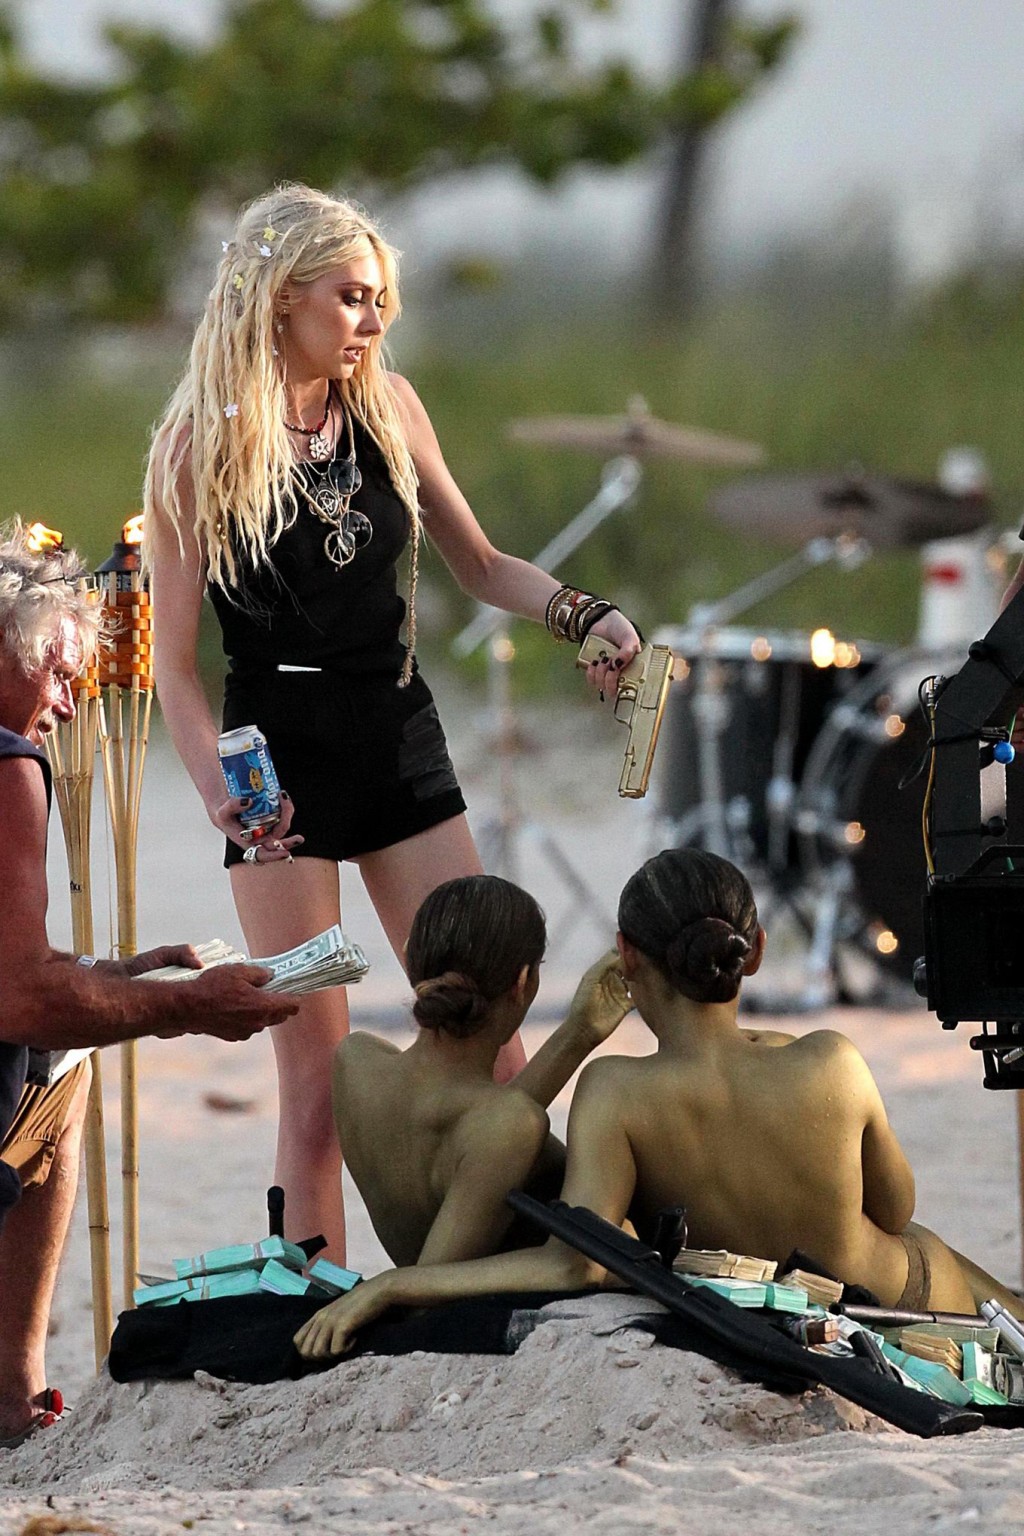 Taylor Momsen shooting a music video on Miami Beach with two bodypainted models #75197587